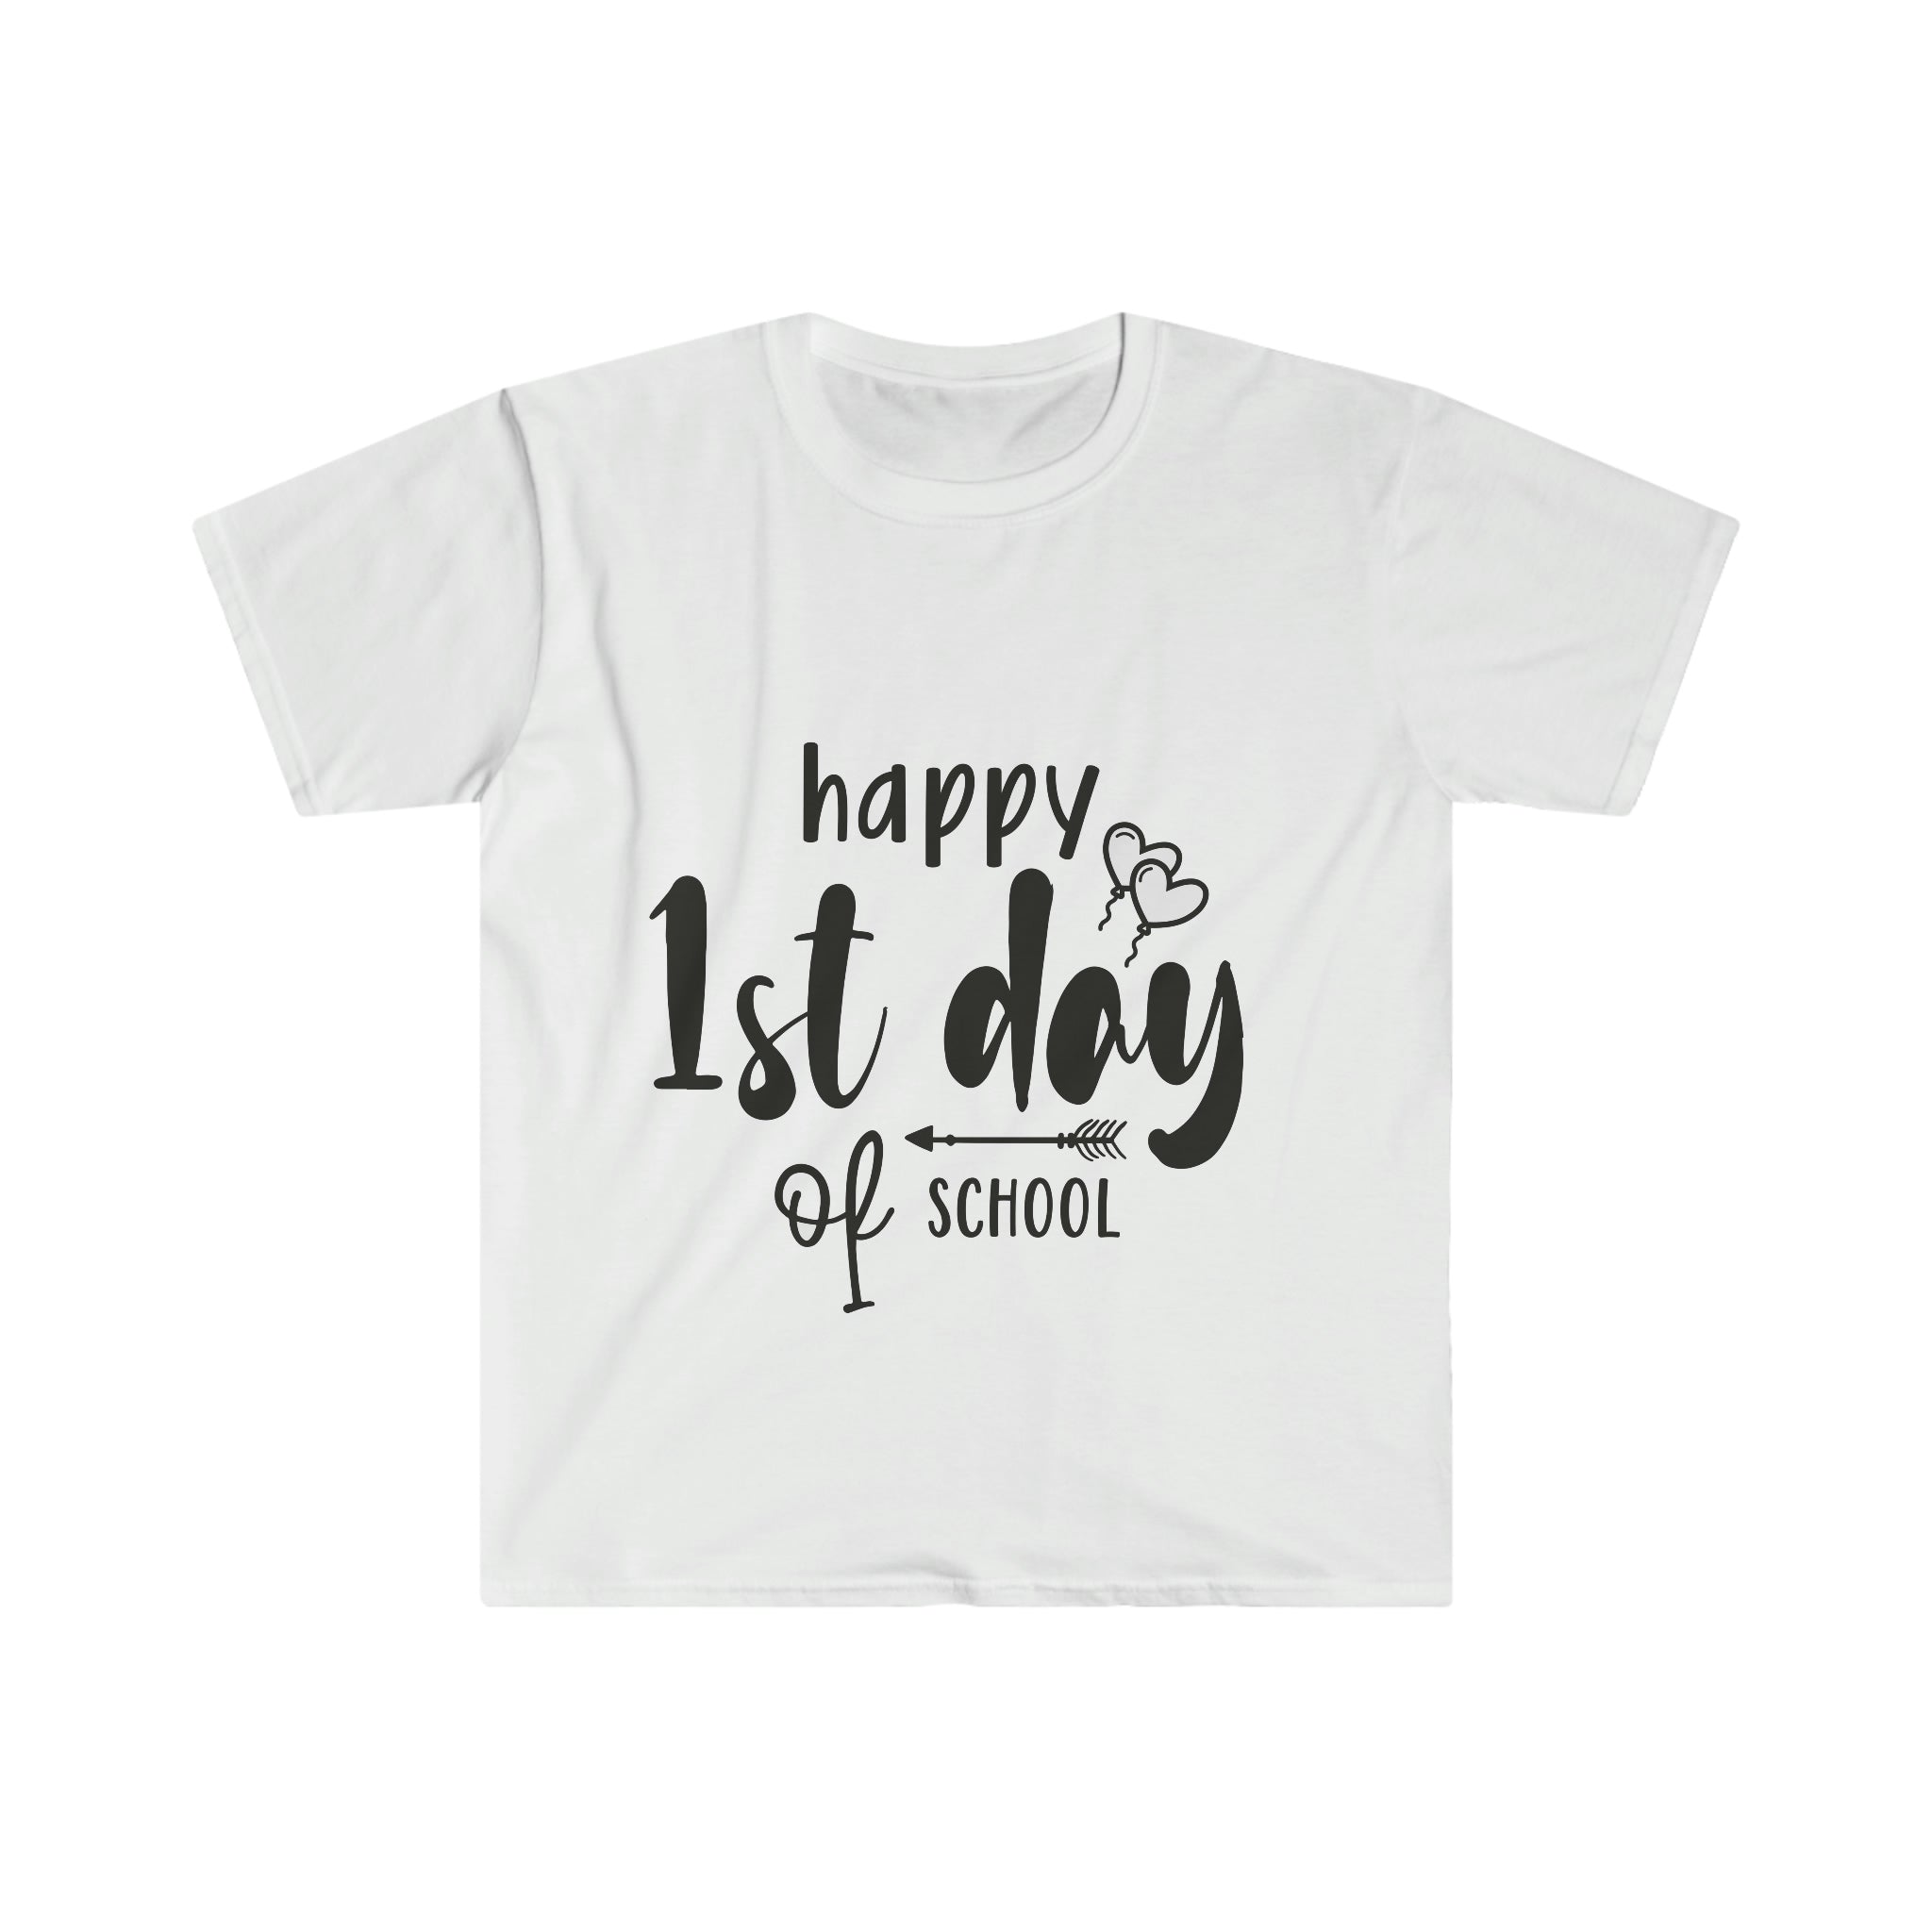 A white First Day of School T-Shirt that says happy first day of school.